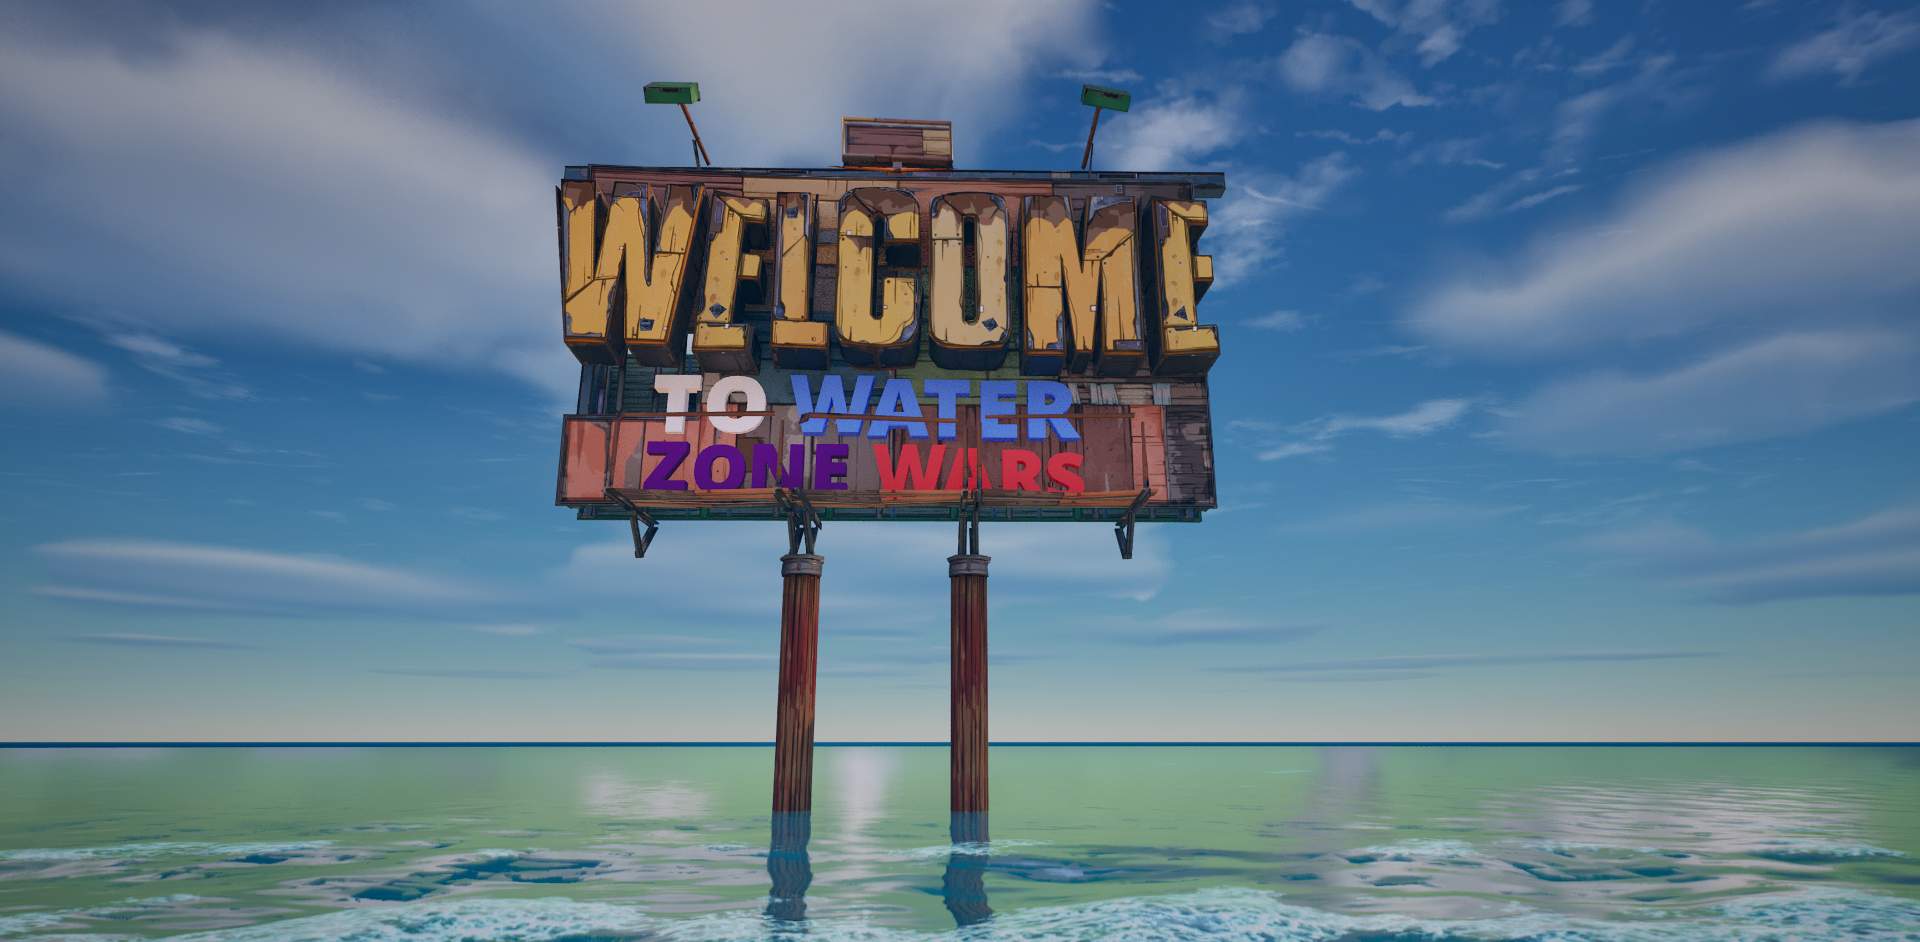 🤩 16 Players Water Zone Wars 🌊🔫 image 3